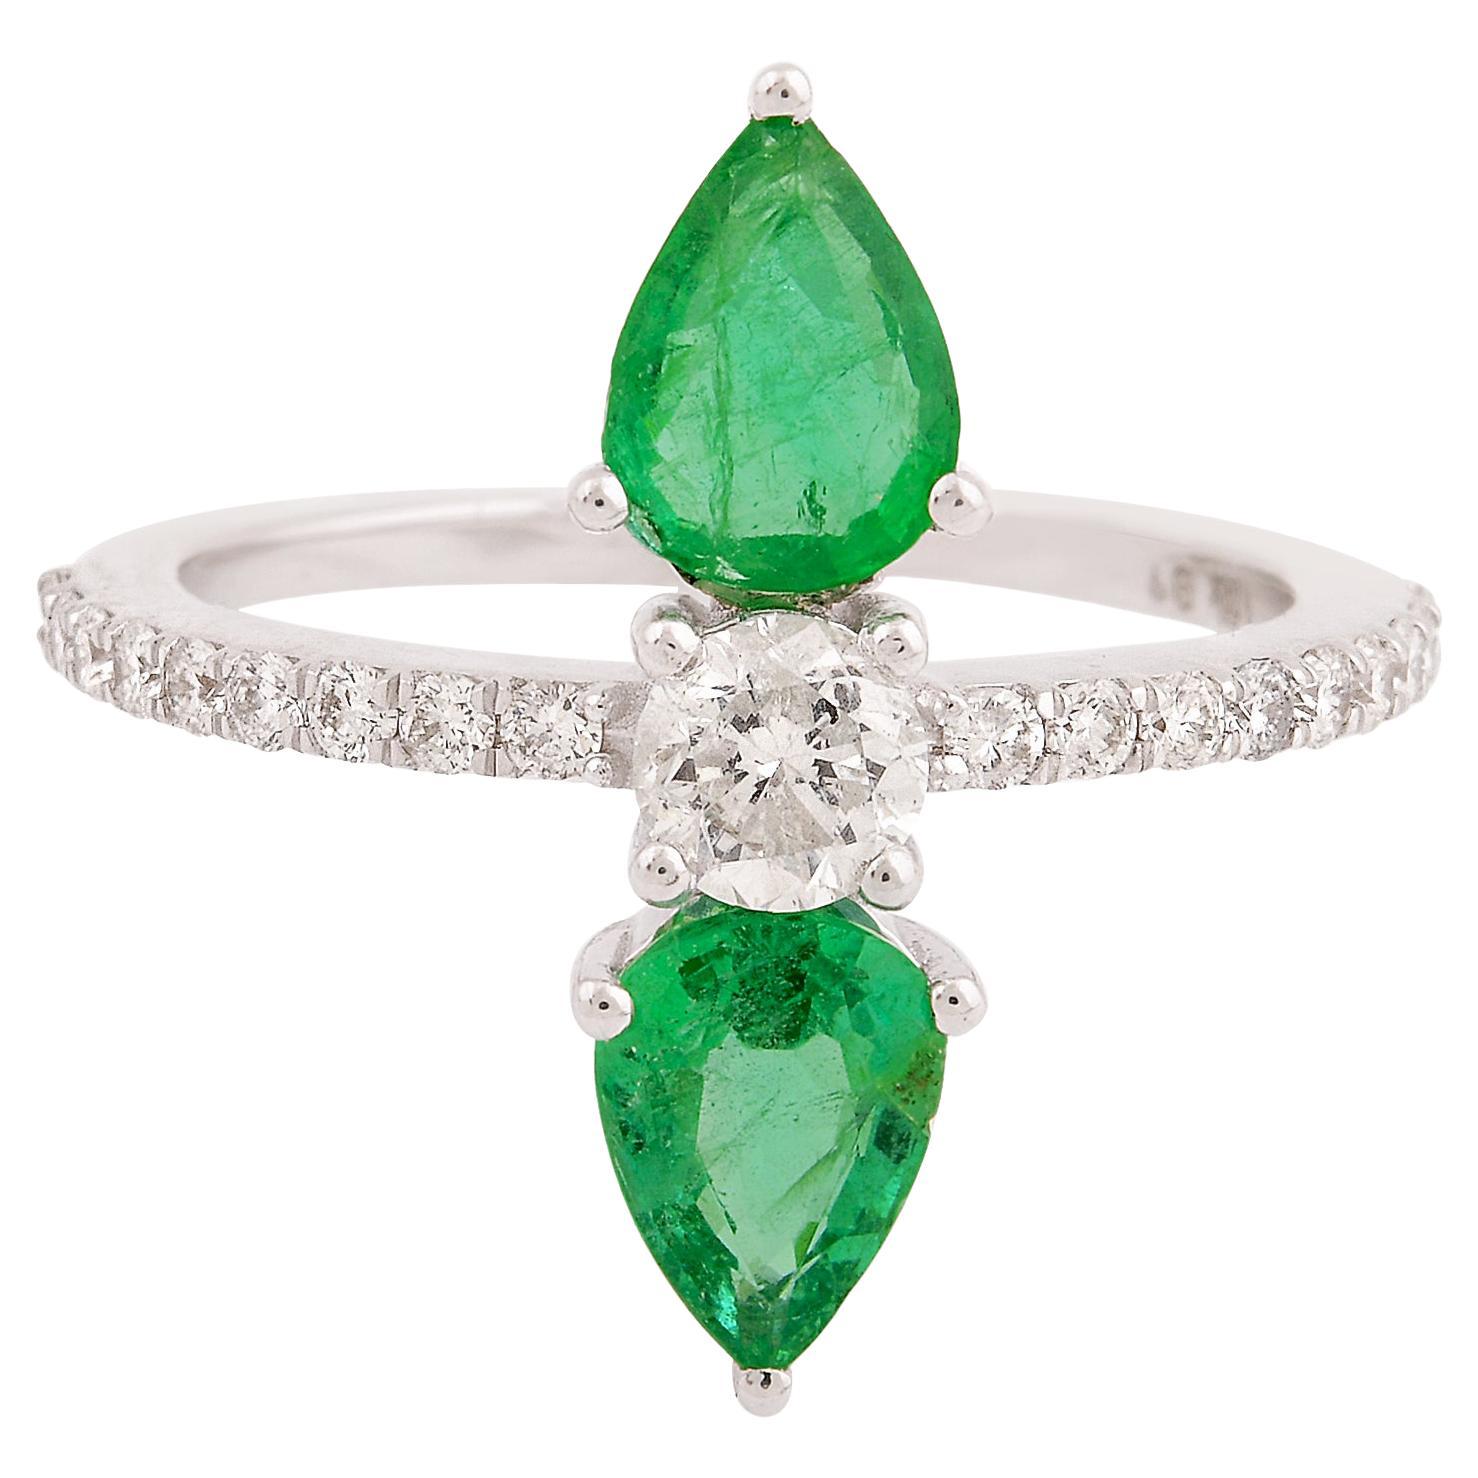 Natural Pear Emerald Gemstone Band Ring Diamond Solid 14k White Gold Jewelry For Sale